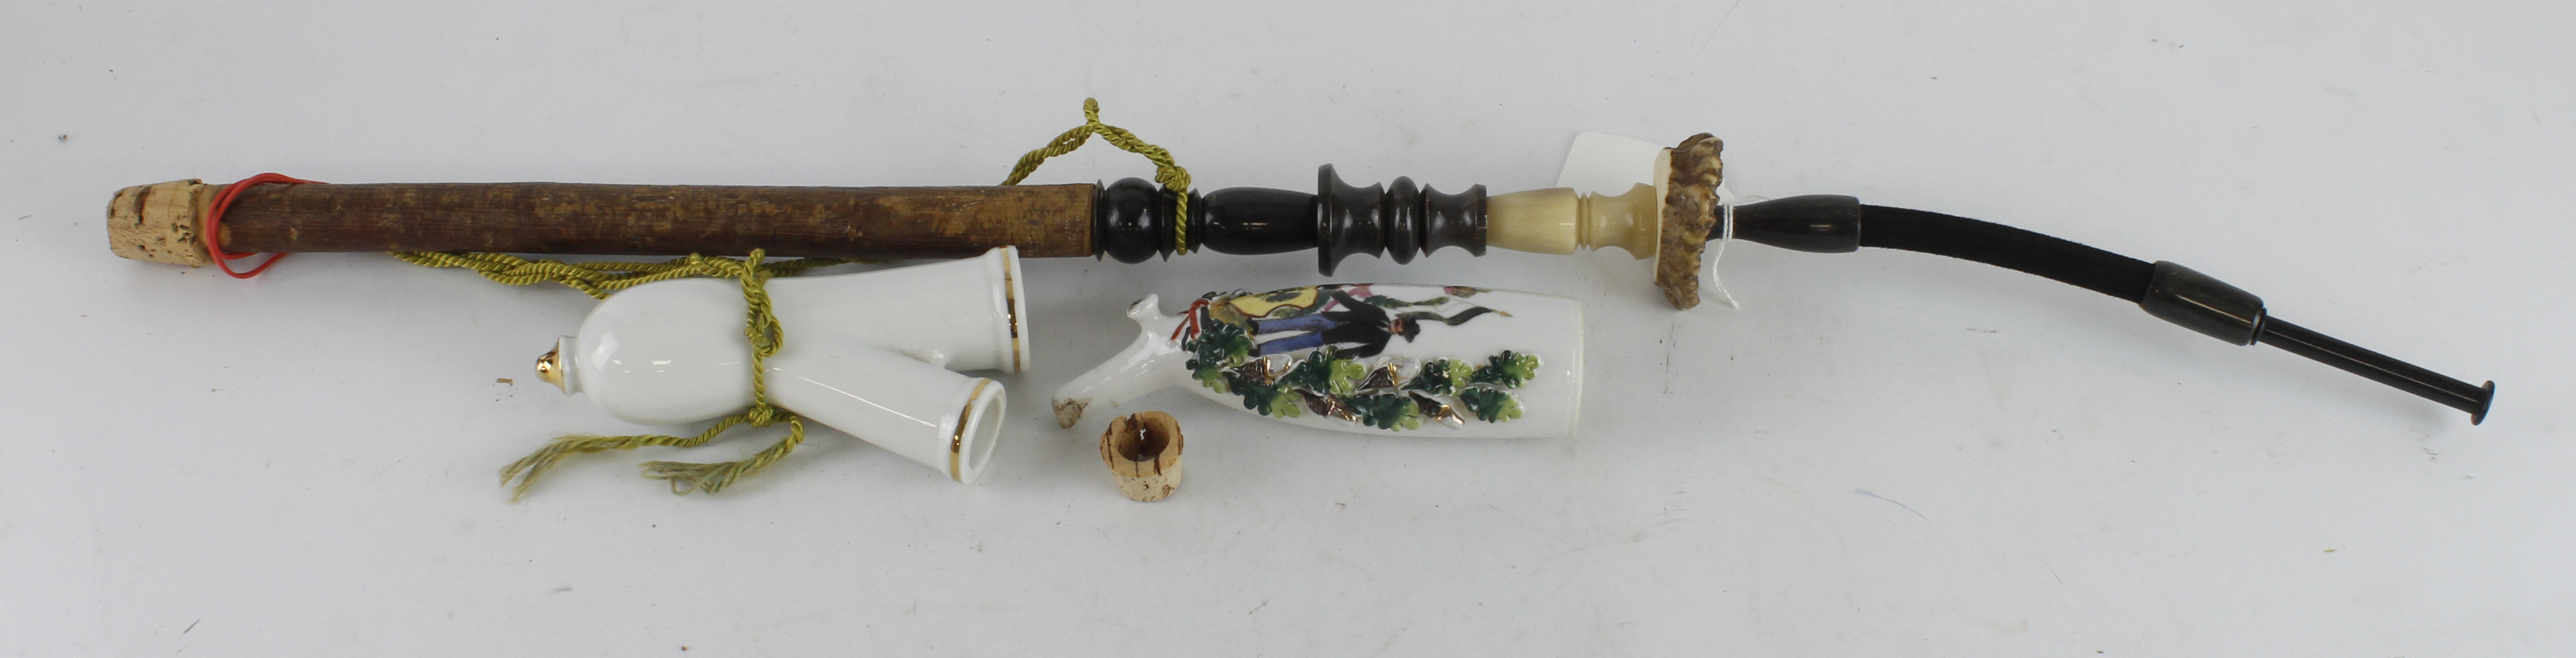 Imperial German a magnificent smokers pipe, highly decorative with painted bowel, minor damage.